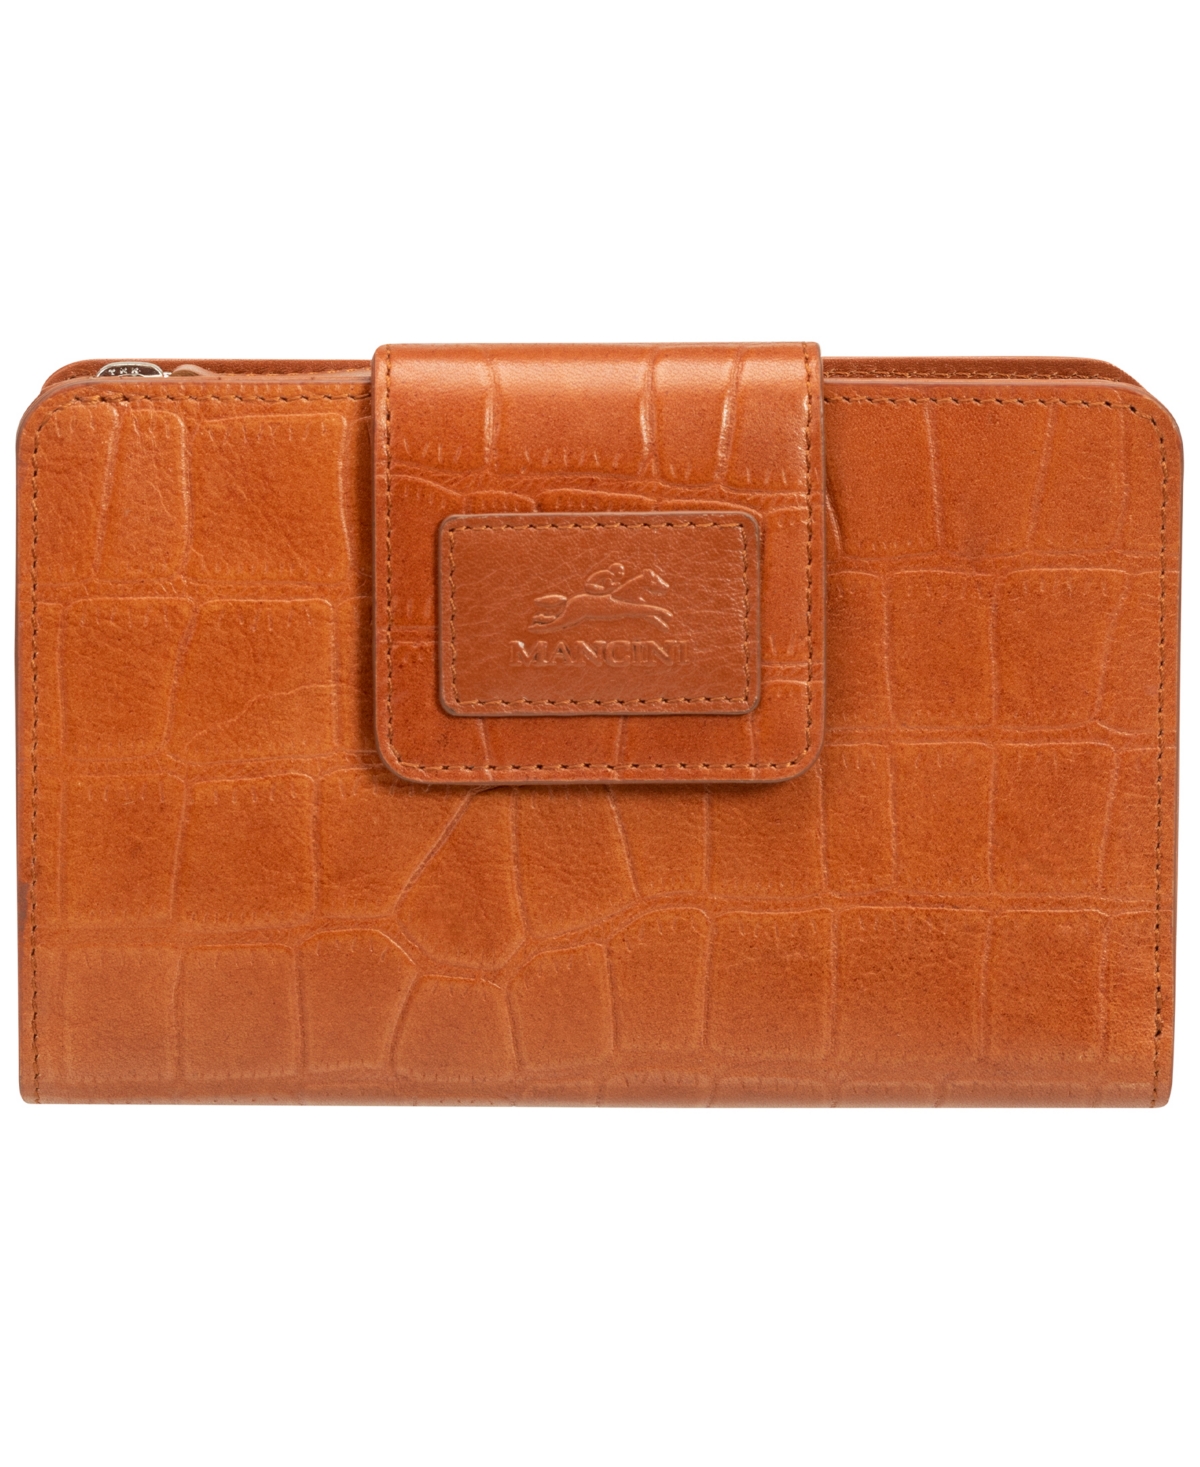 Women's Croco Collection Rfid Secure Mini Clutch Wallet - Tan